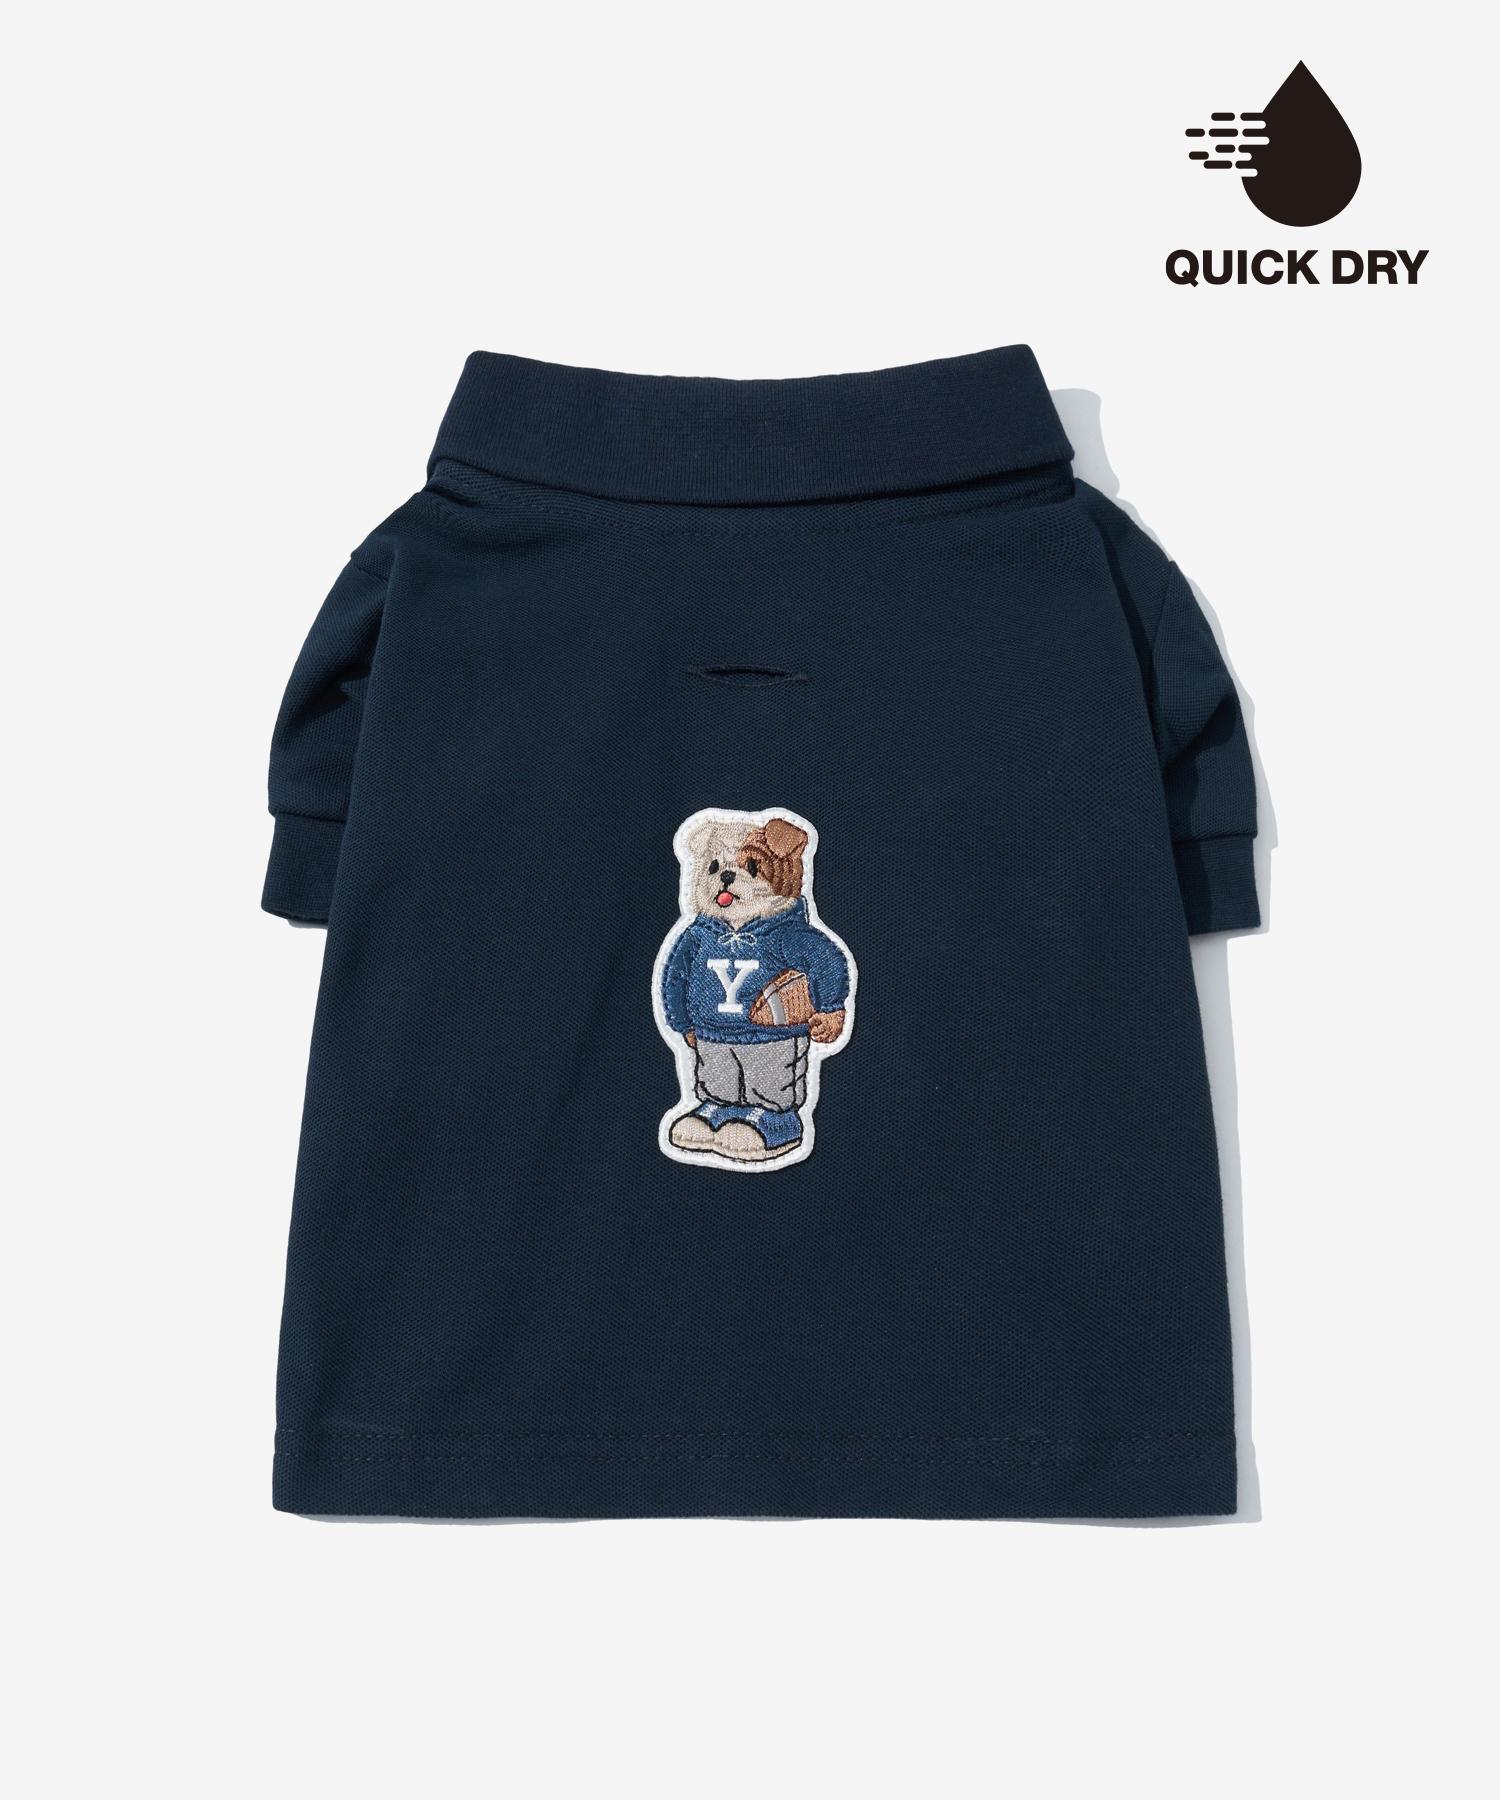 EMBROIDERY DAN QUICK DRY PIQUE DOGGY POLO SHIRT NAVY